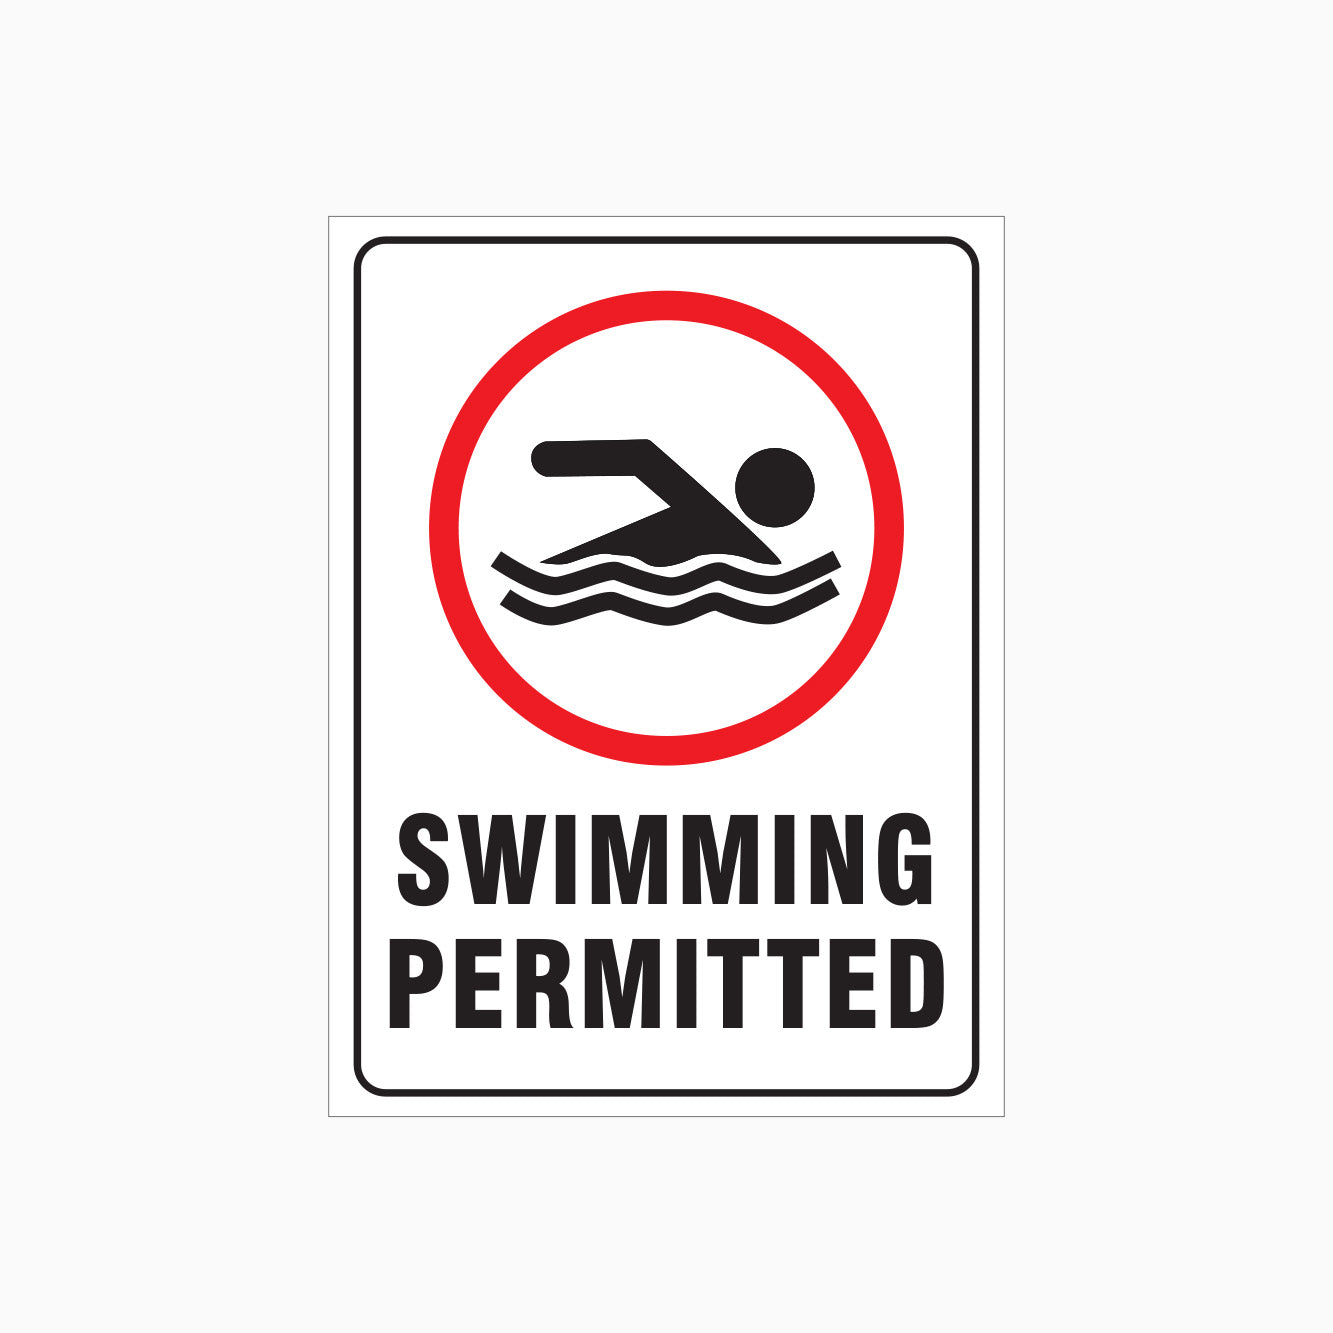 SWIMMING PERMITTED SIGN